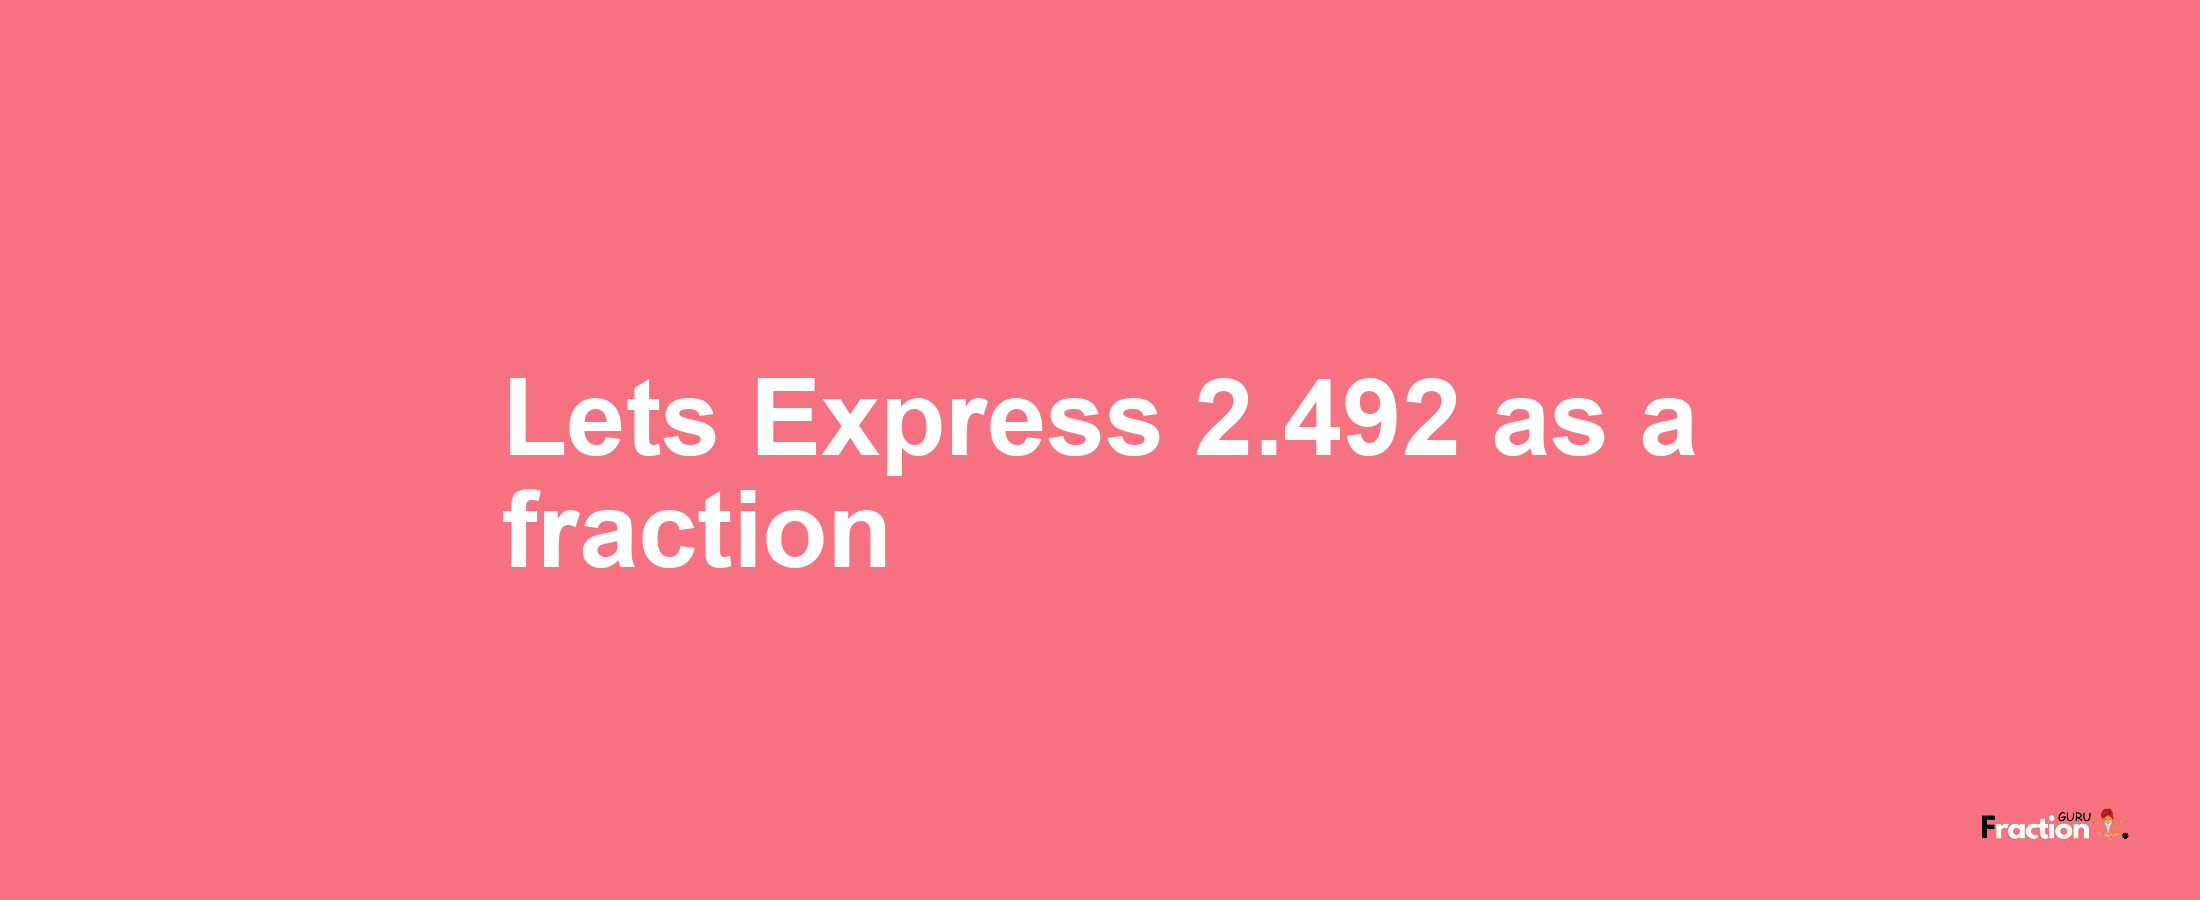 Lets Express 2.492 as afraction